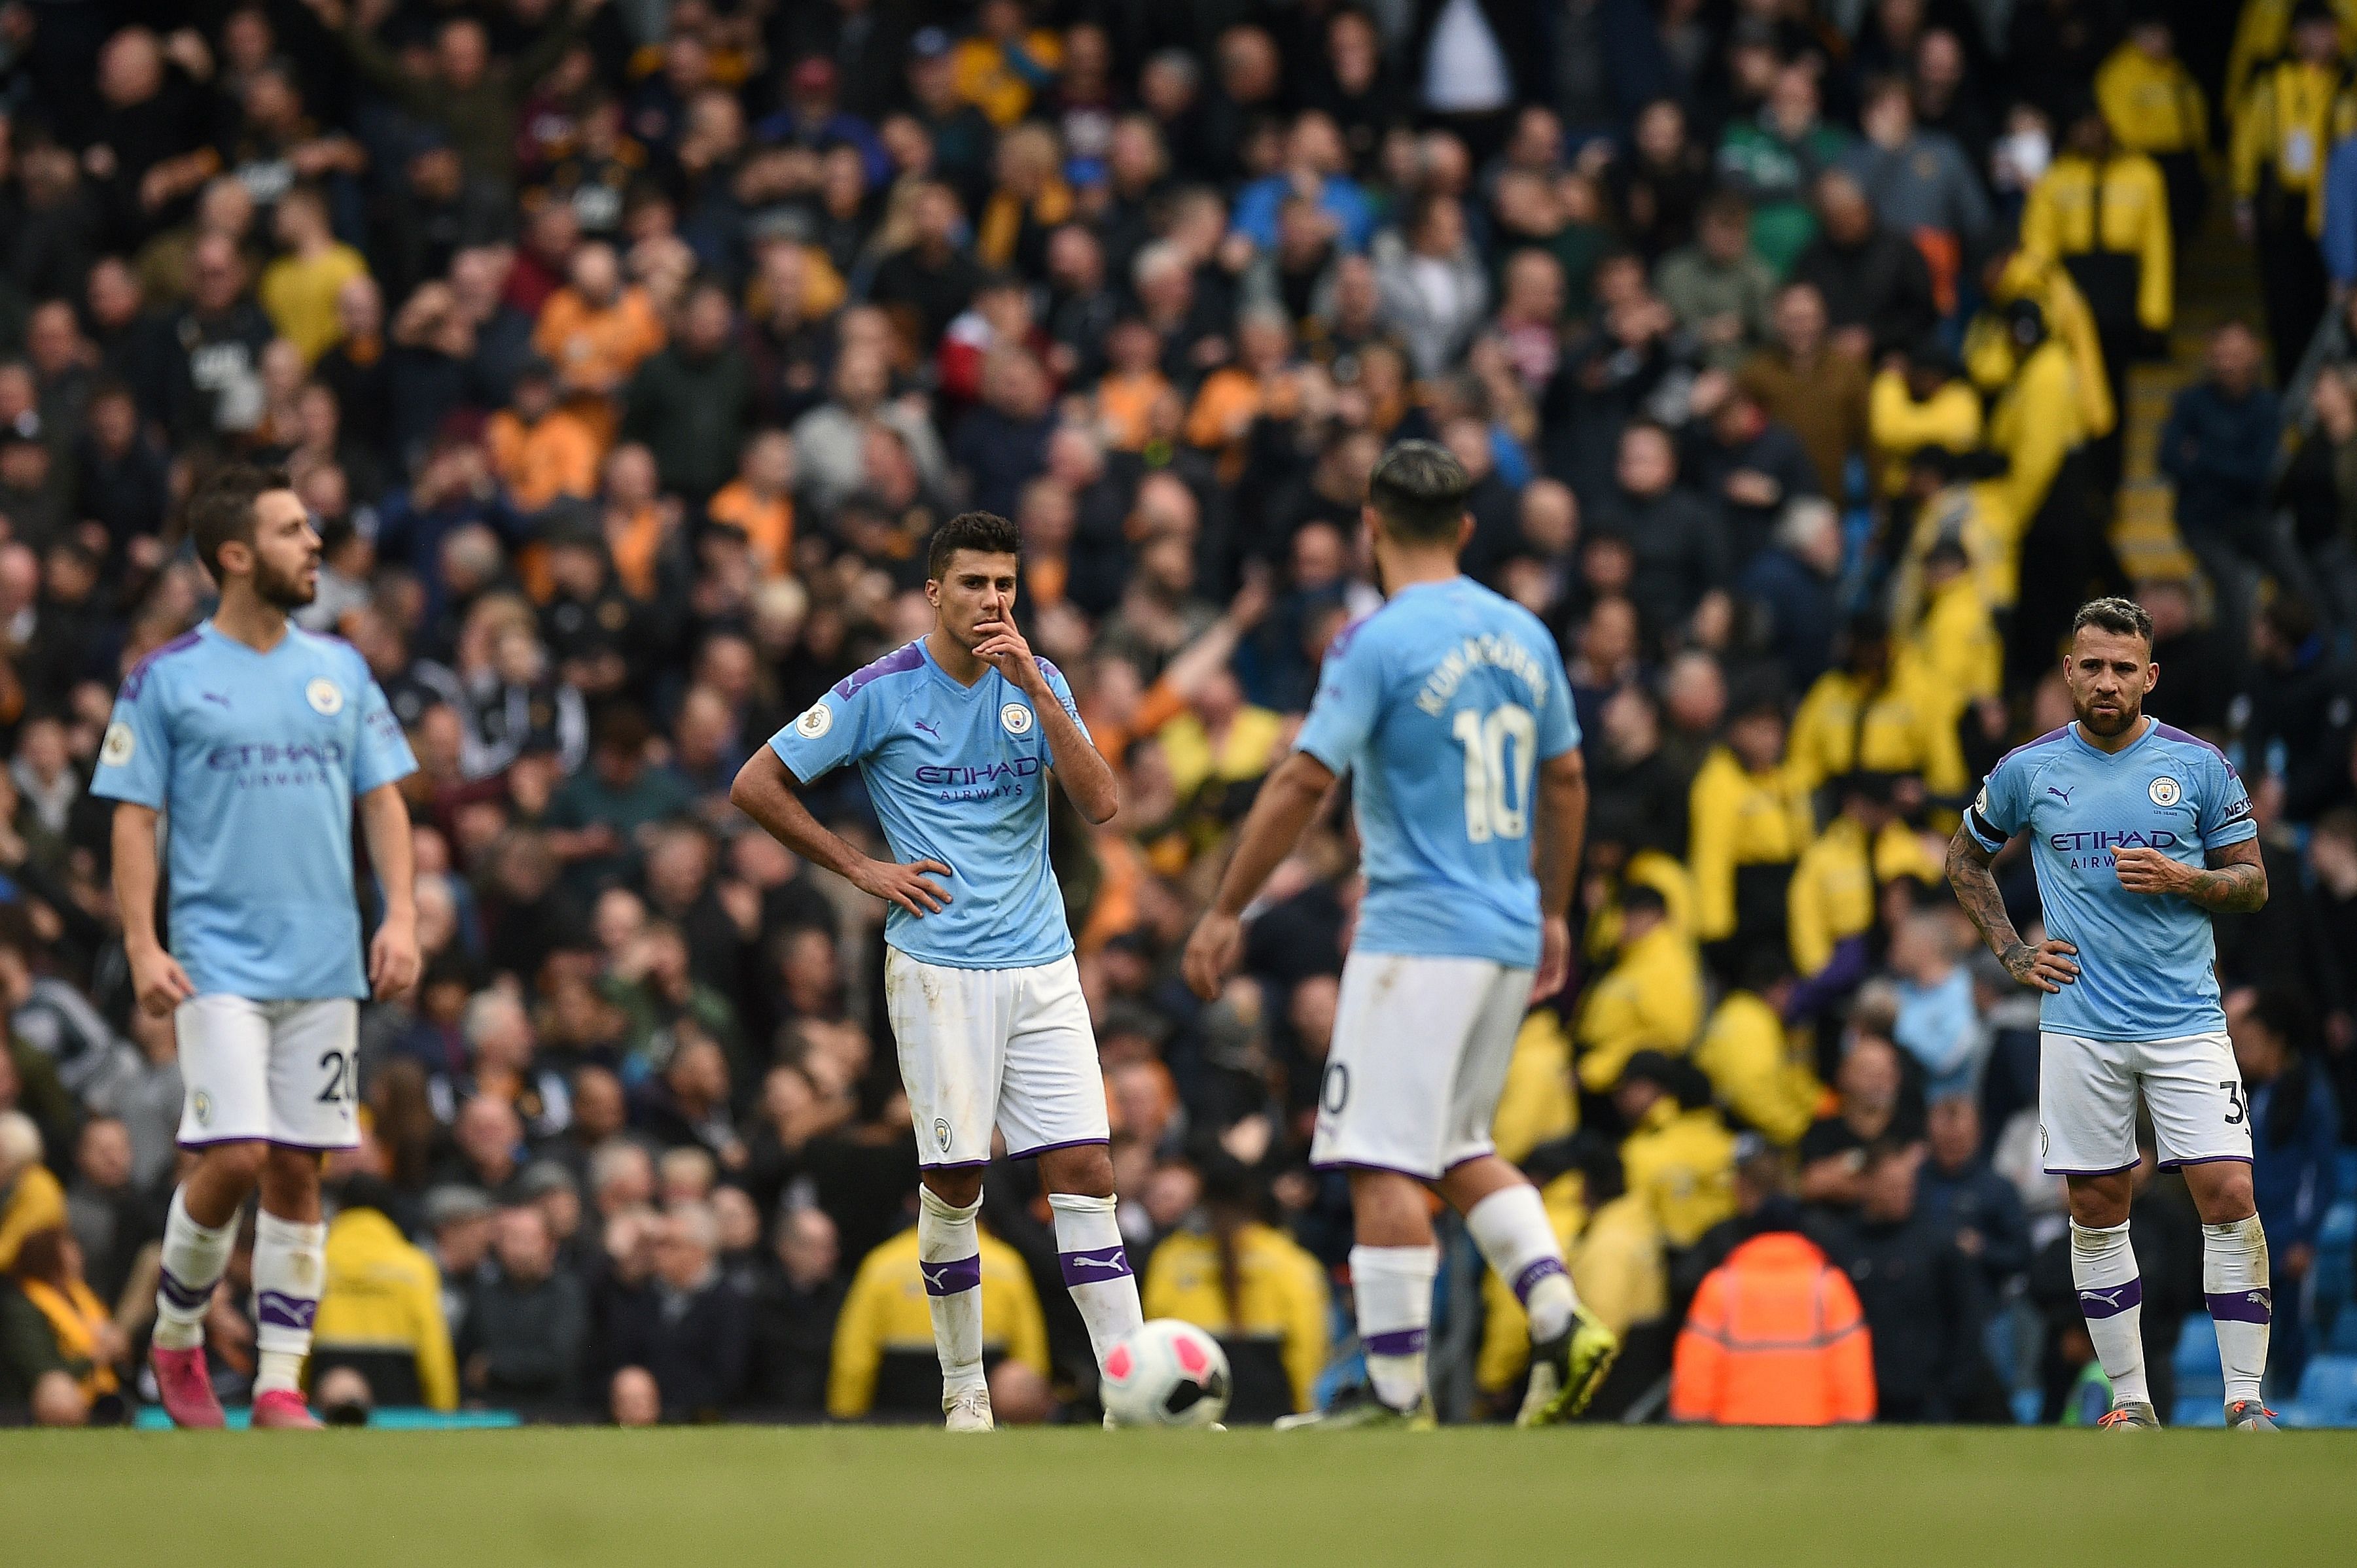 Manchester City players react after conceding their second goal during the English Premier League football match. (AFP Photo)